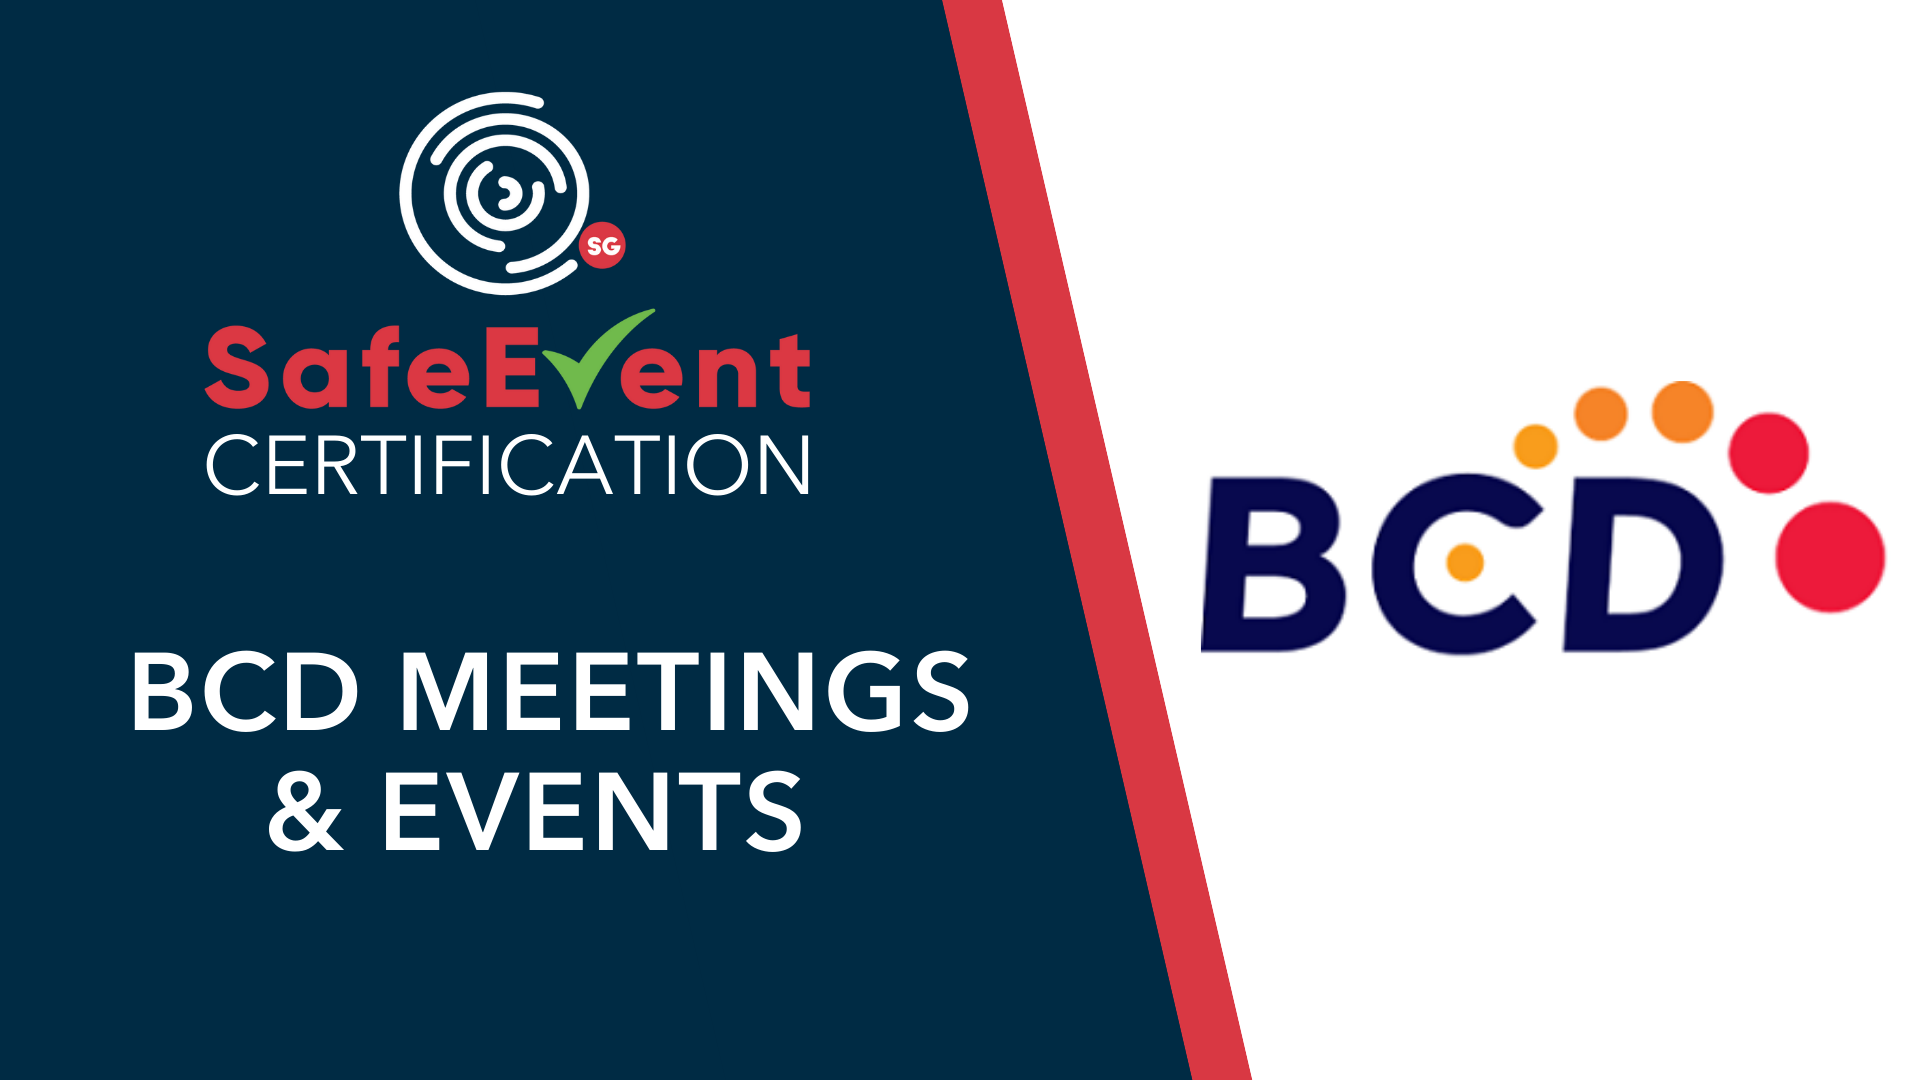 SG SafeEvent Certification: Charissa Meesriyong, Regional Operations Director of BCD Meetings & Events